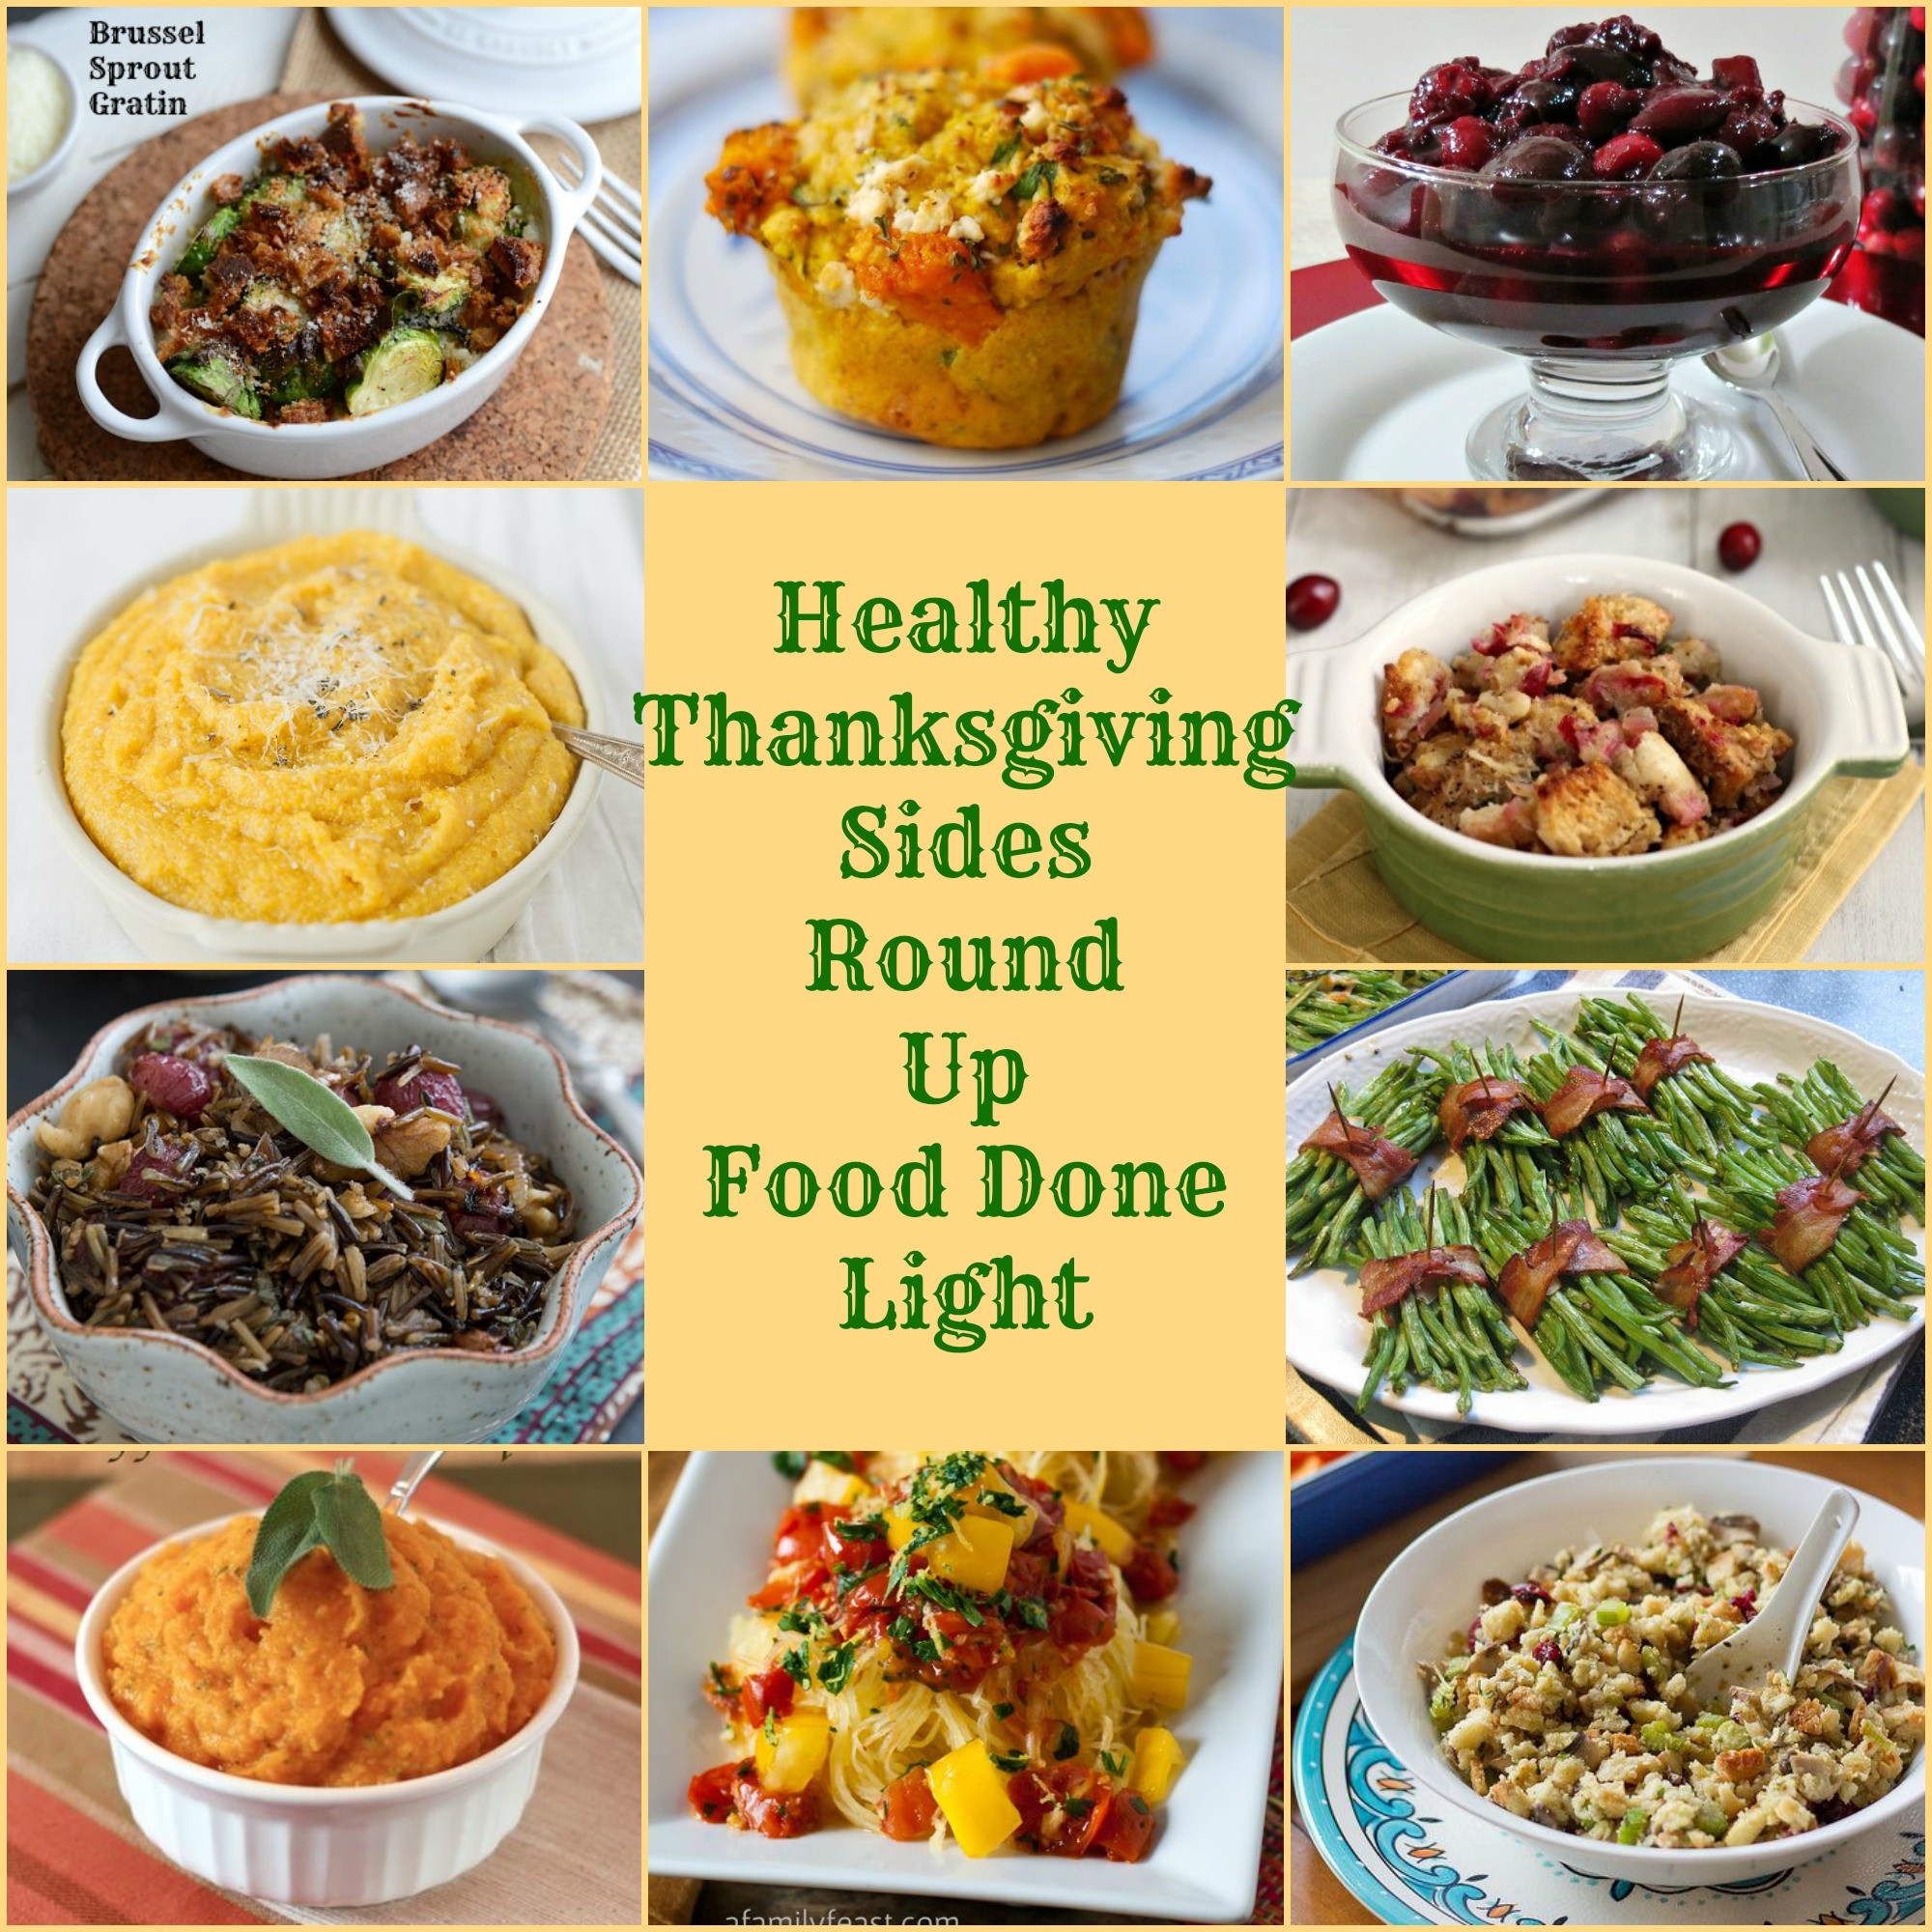 Healthy Thanksgiving Side Dishes
 Healthy Thanksgiving Sides Recipe Round Up Food Done Light